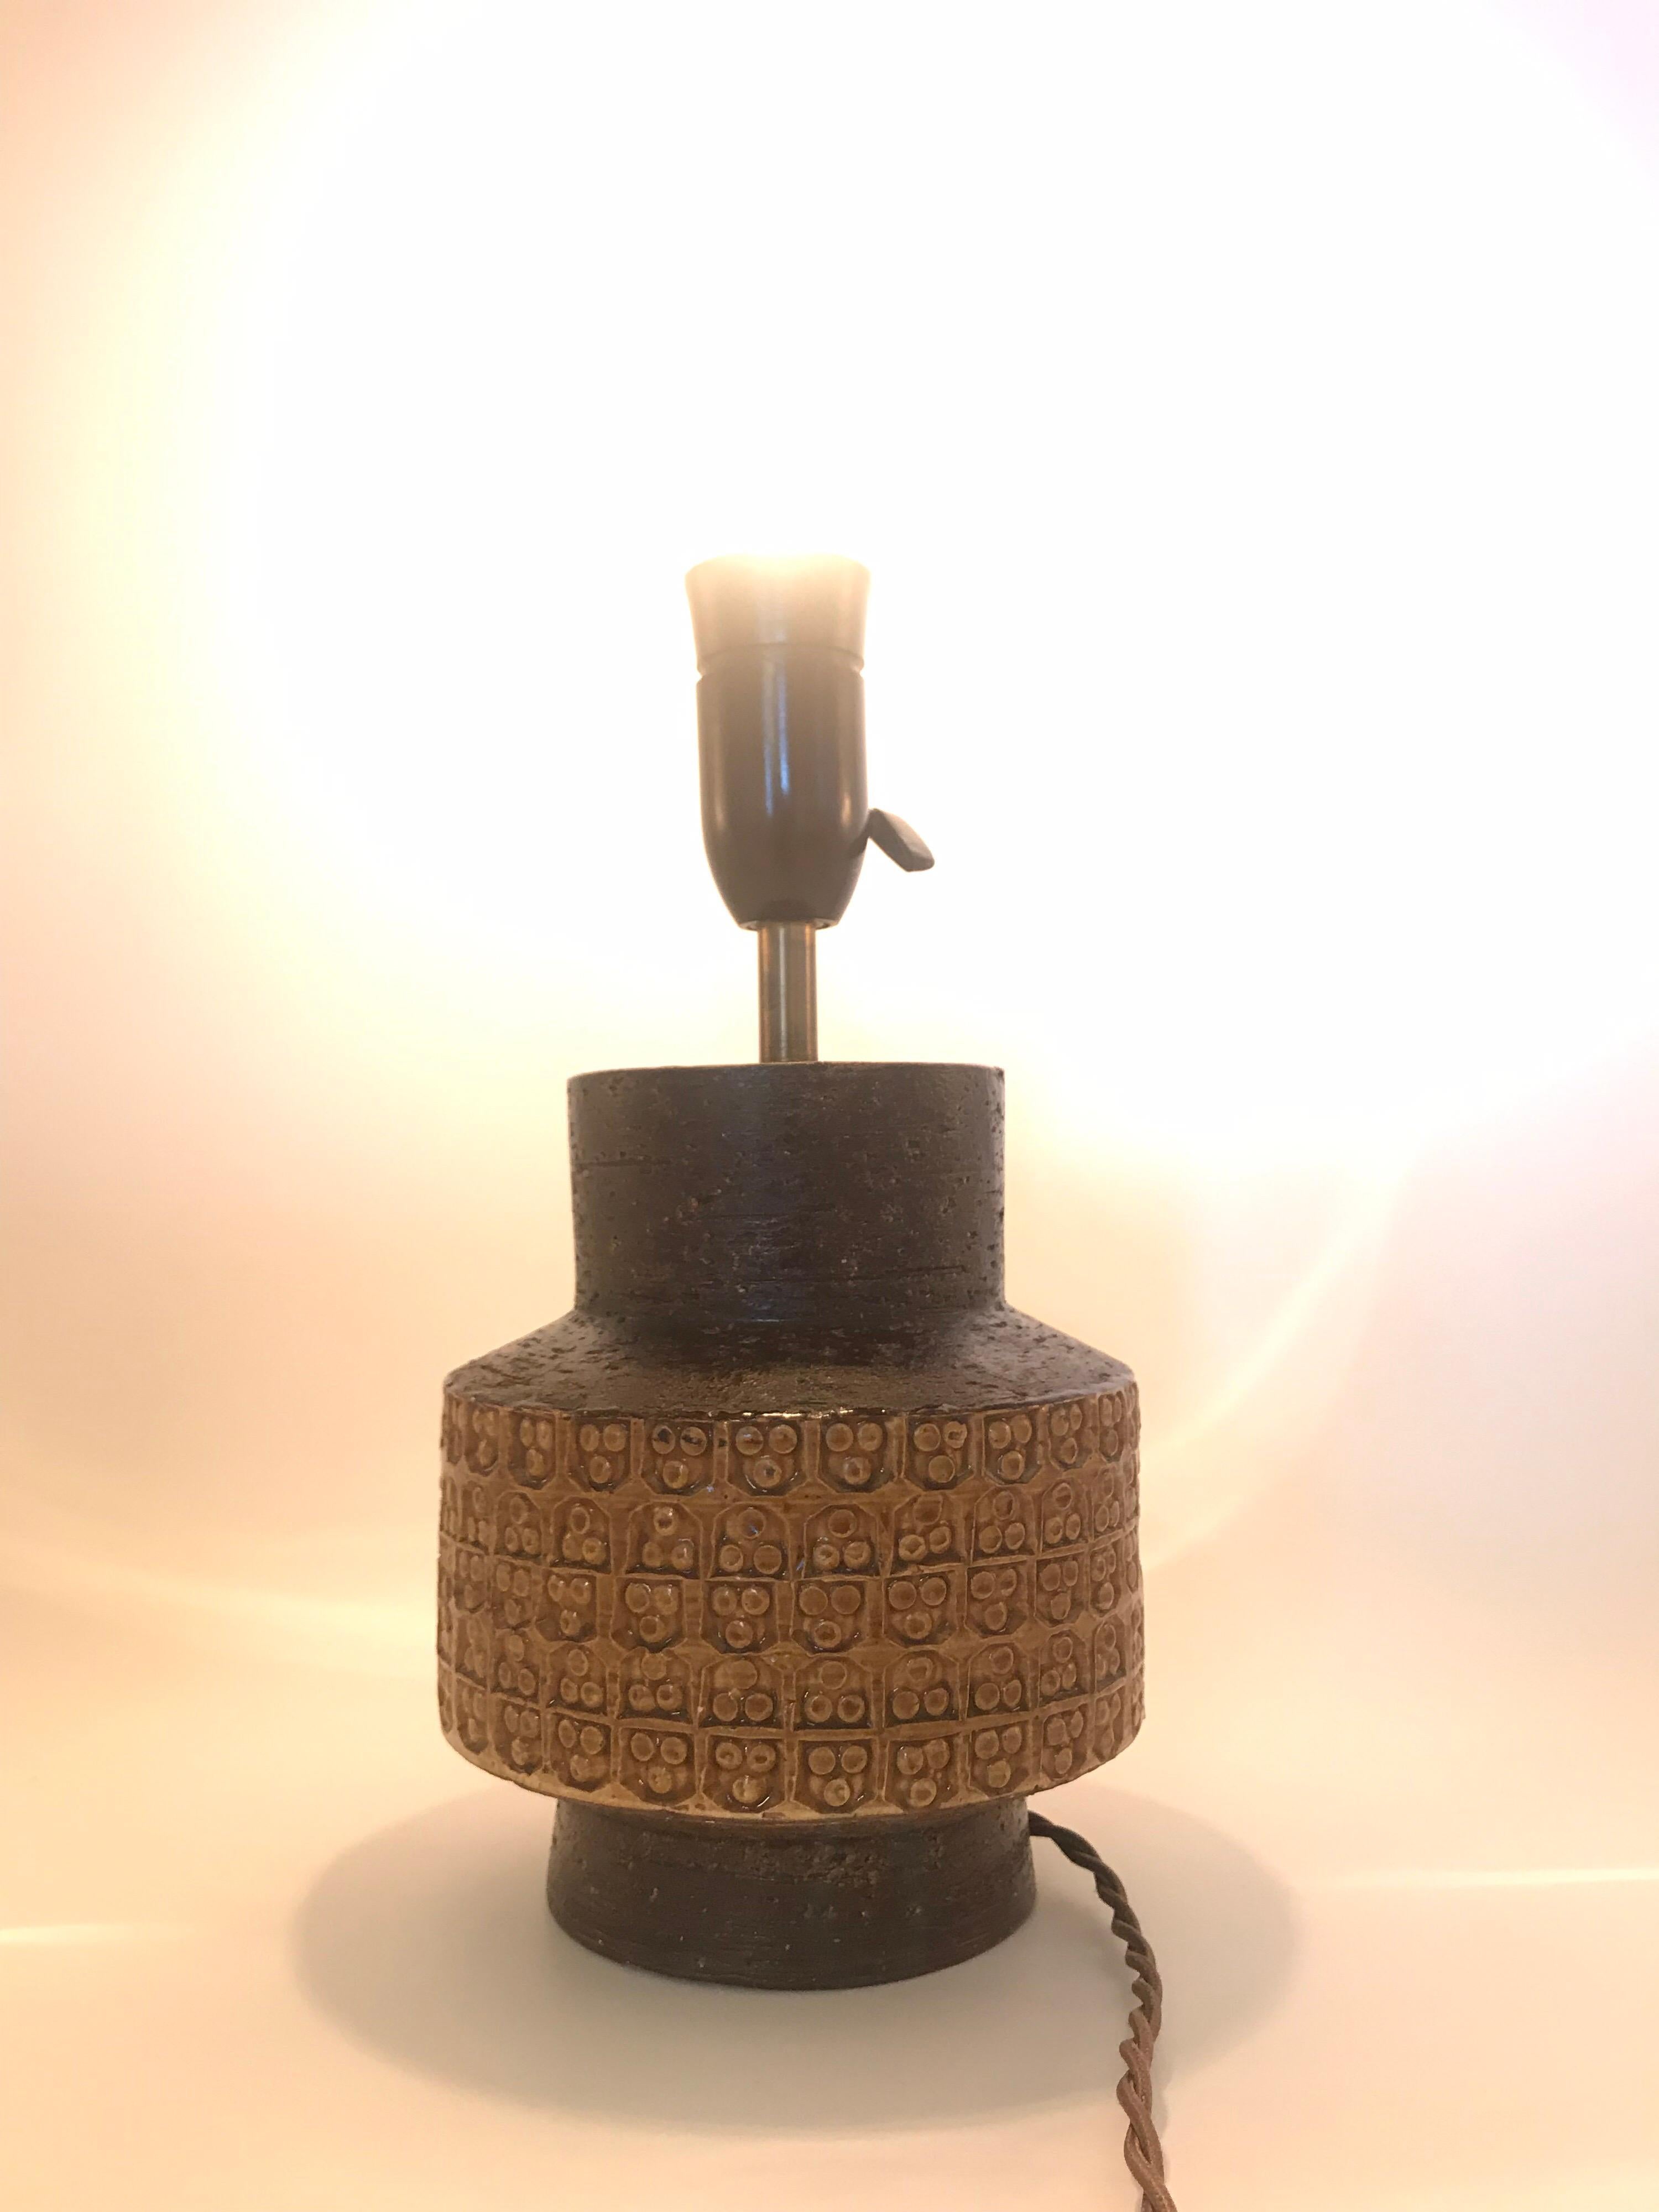 Italian Midcentury Pottery Table Lamp Designed by Aldo Londi for Bitossi of Italy